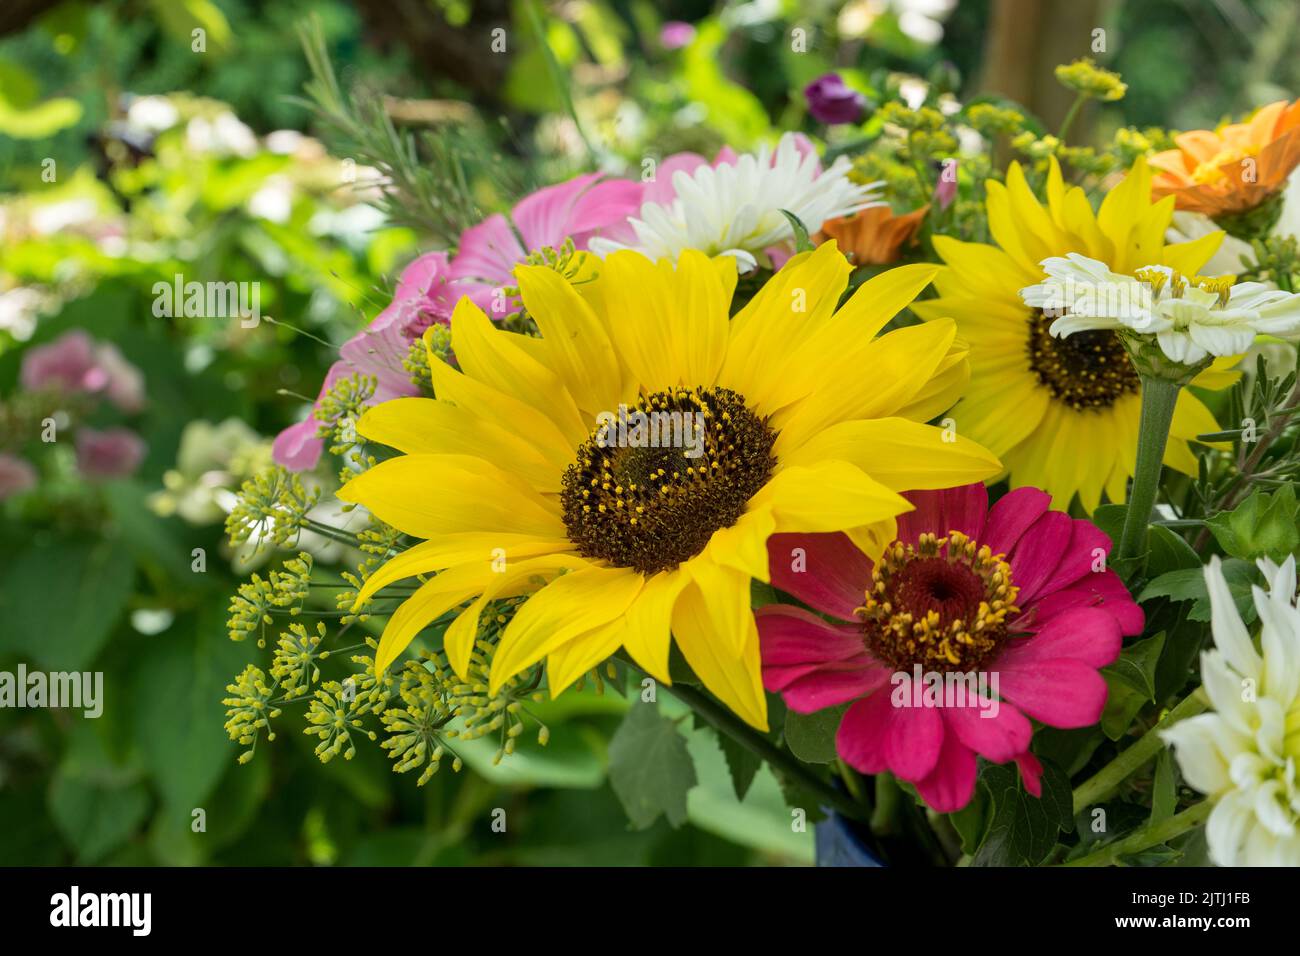 Bouquet with sunflowers and zinnias Stock Photo